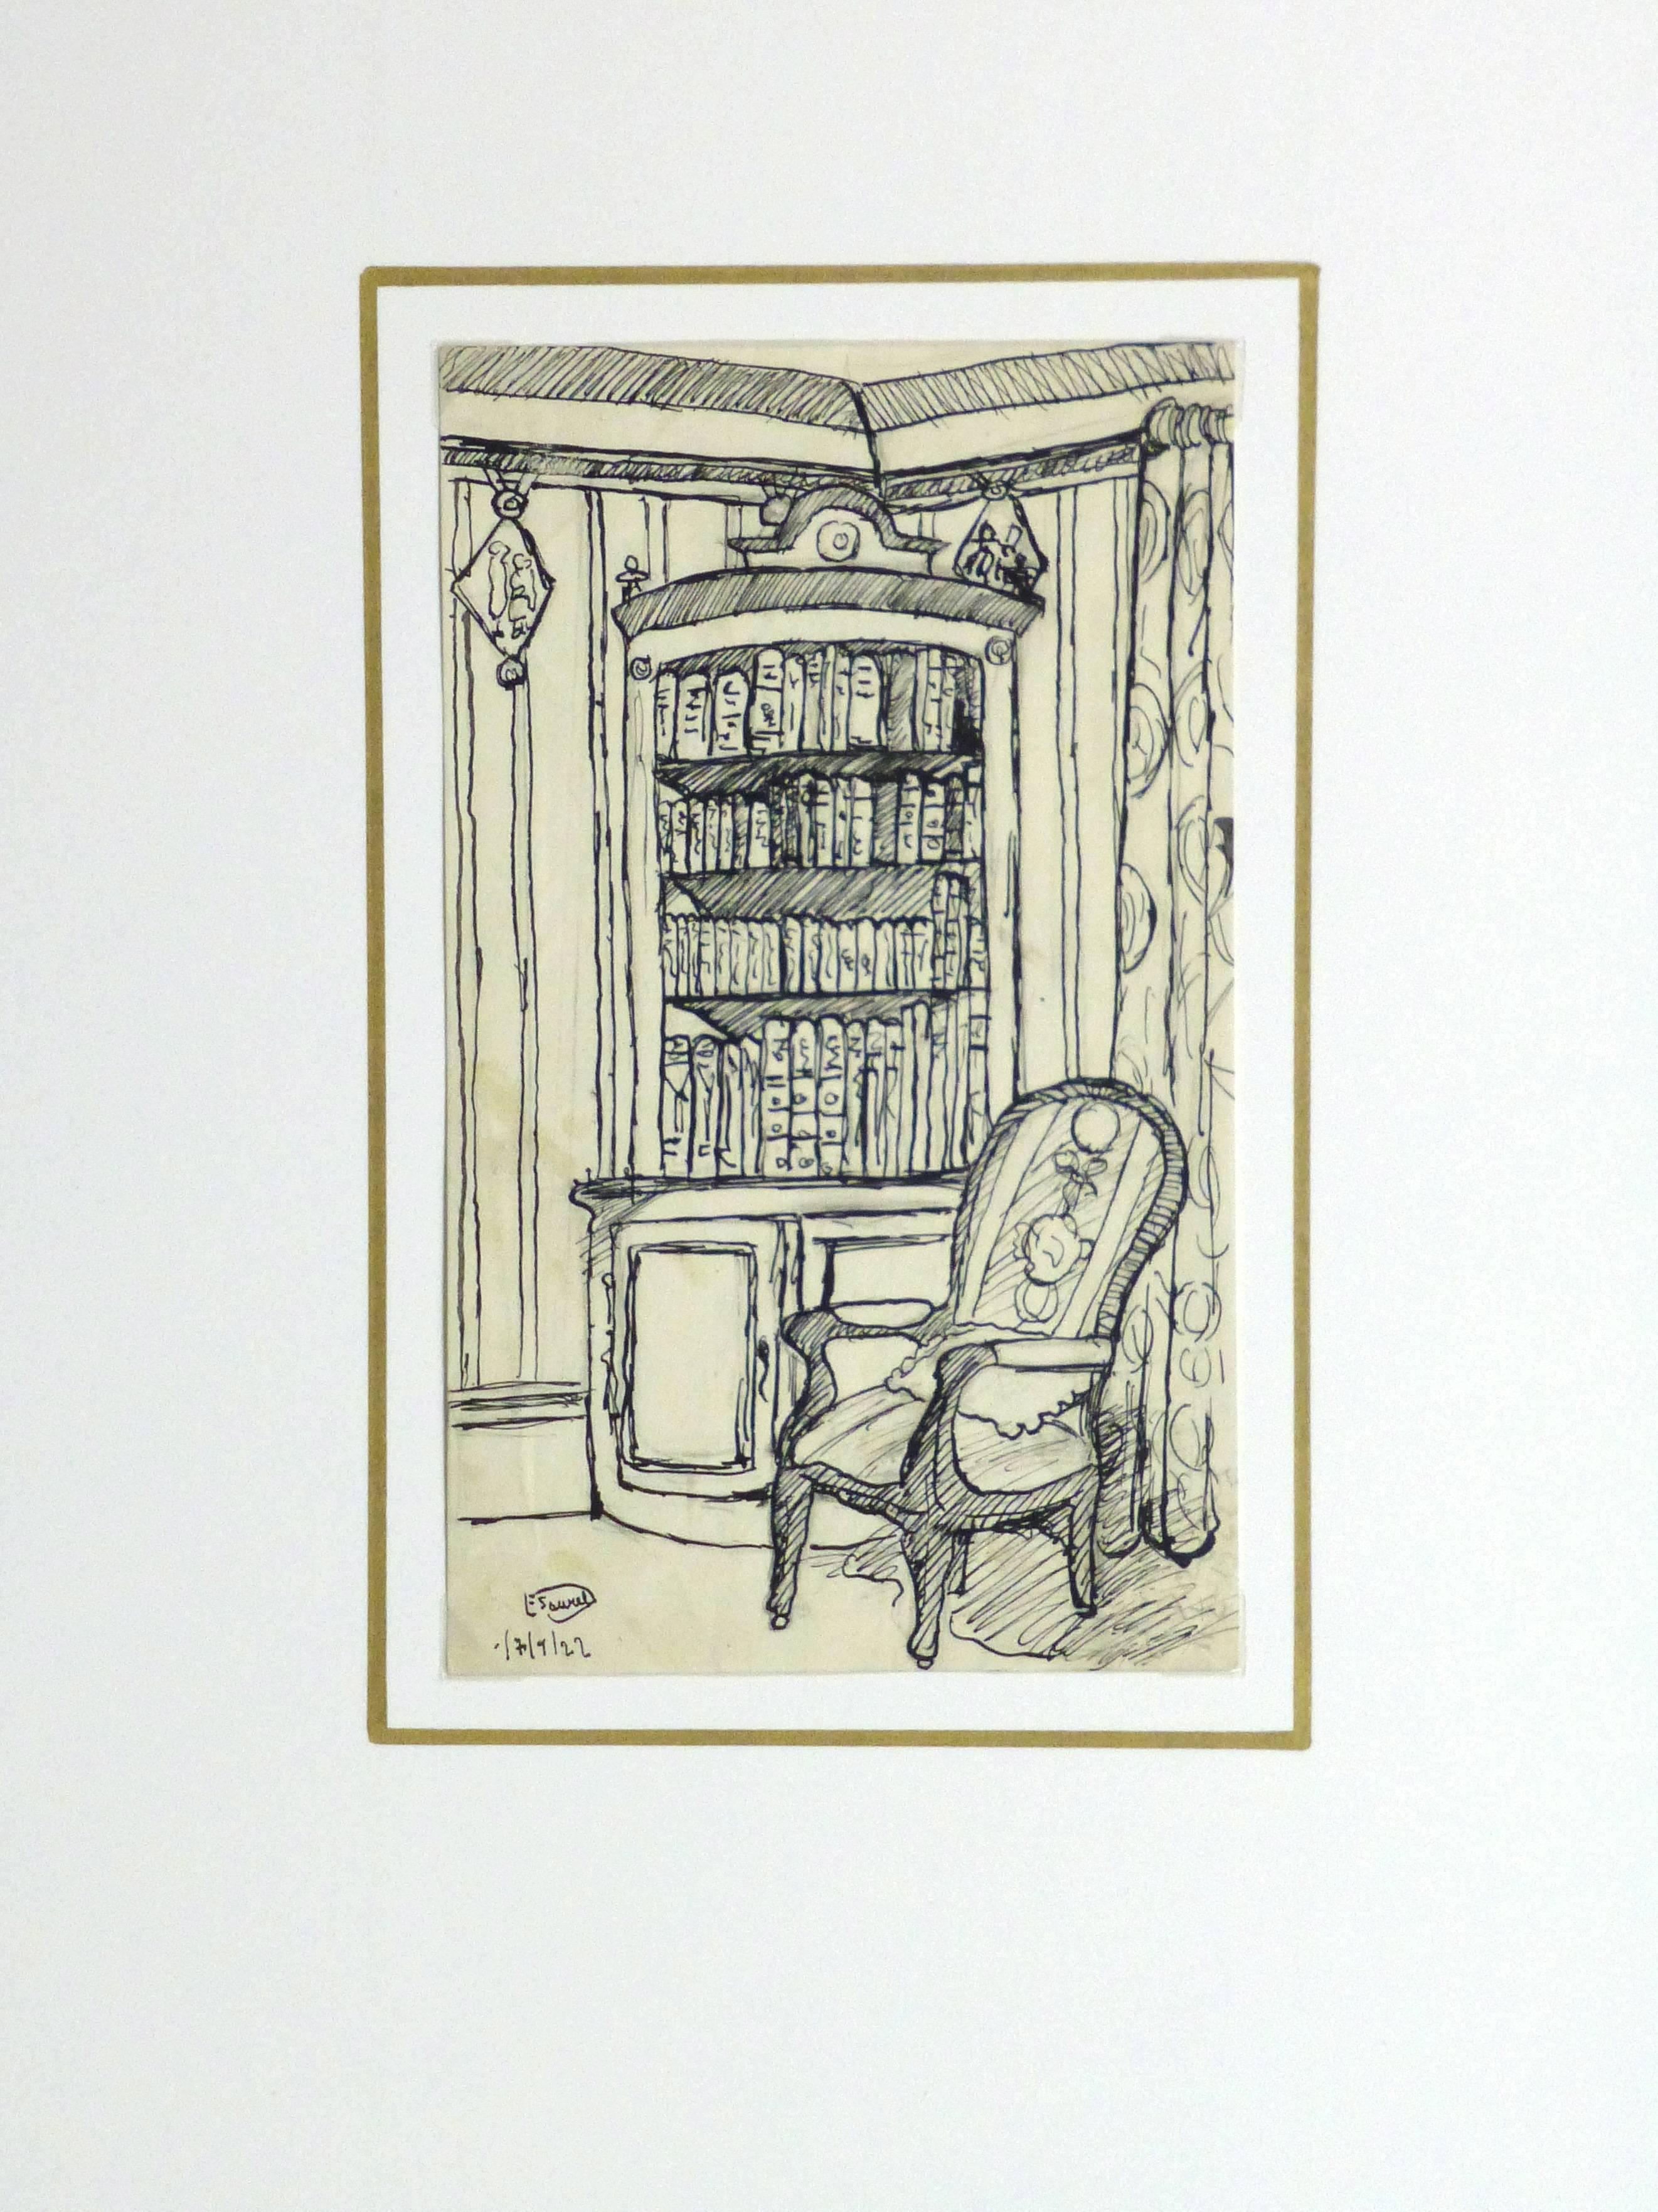 Elegant pen and ink sketch of a small and inviting reading nook tucked in the corner of a tasteful home by artist E. Sourel, 1922. Signed and dated lower left. 

Original artwork on paper displayed on a white mat with a gold border. Archival plastic